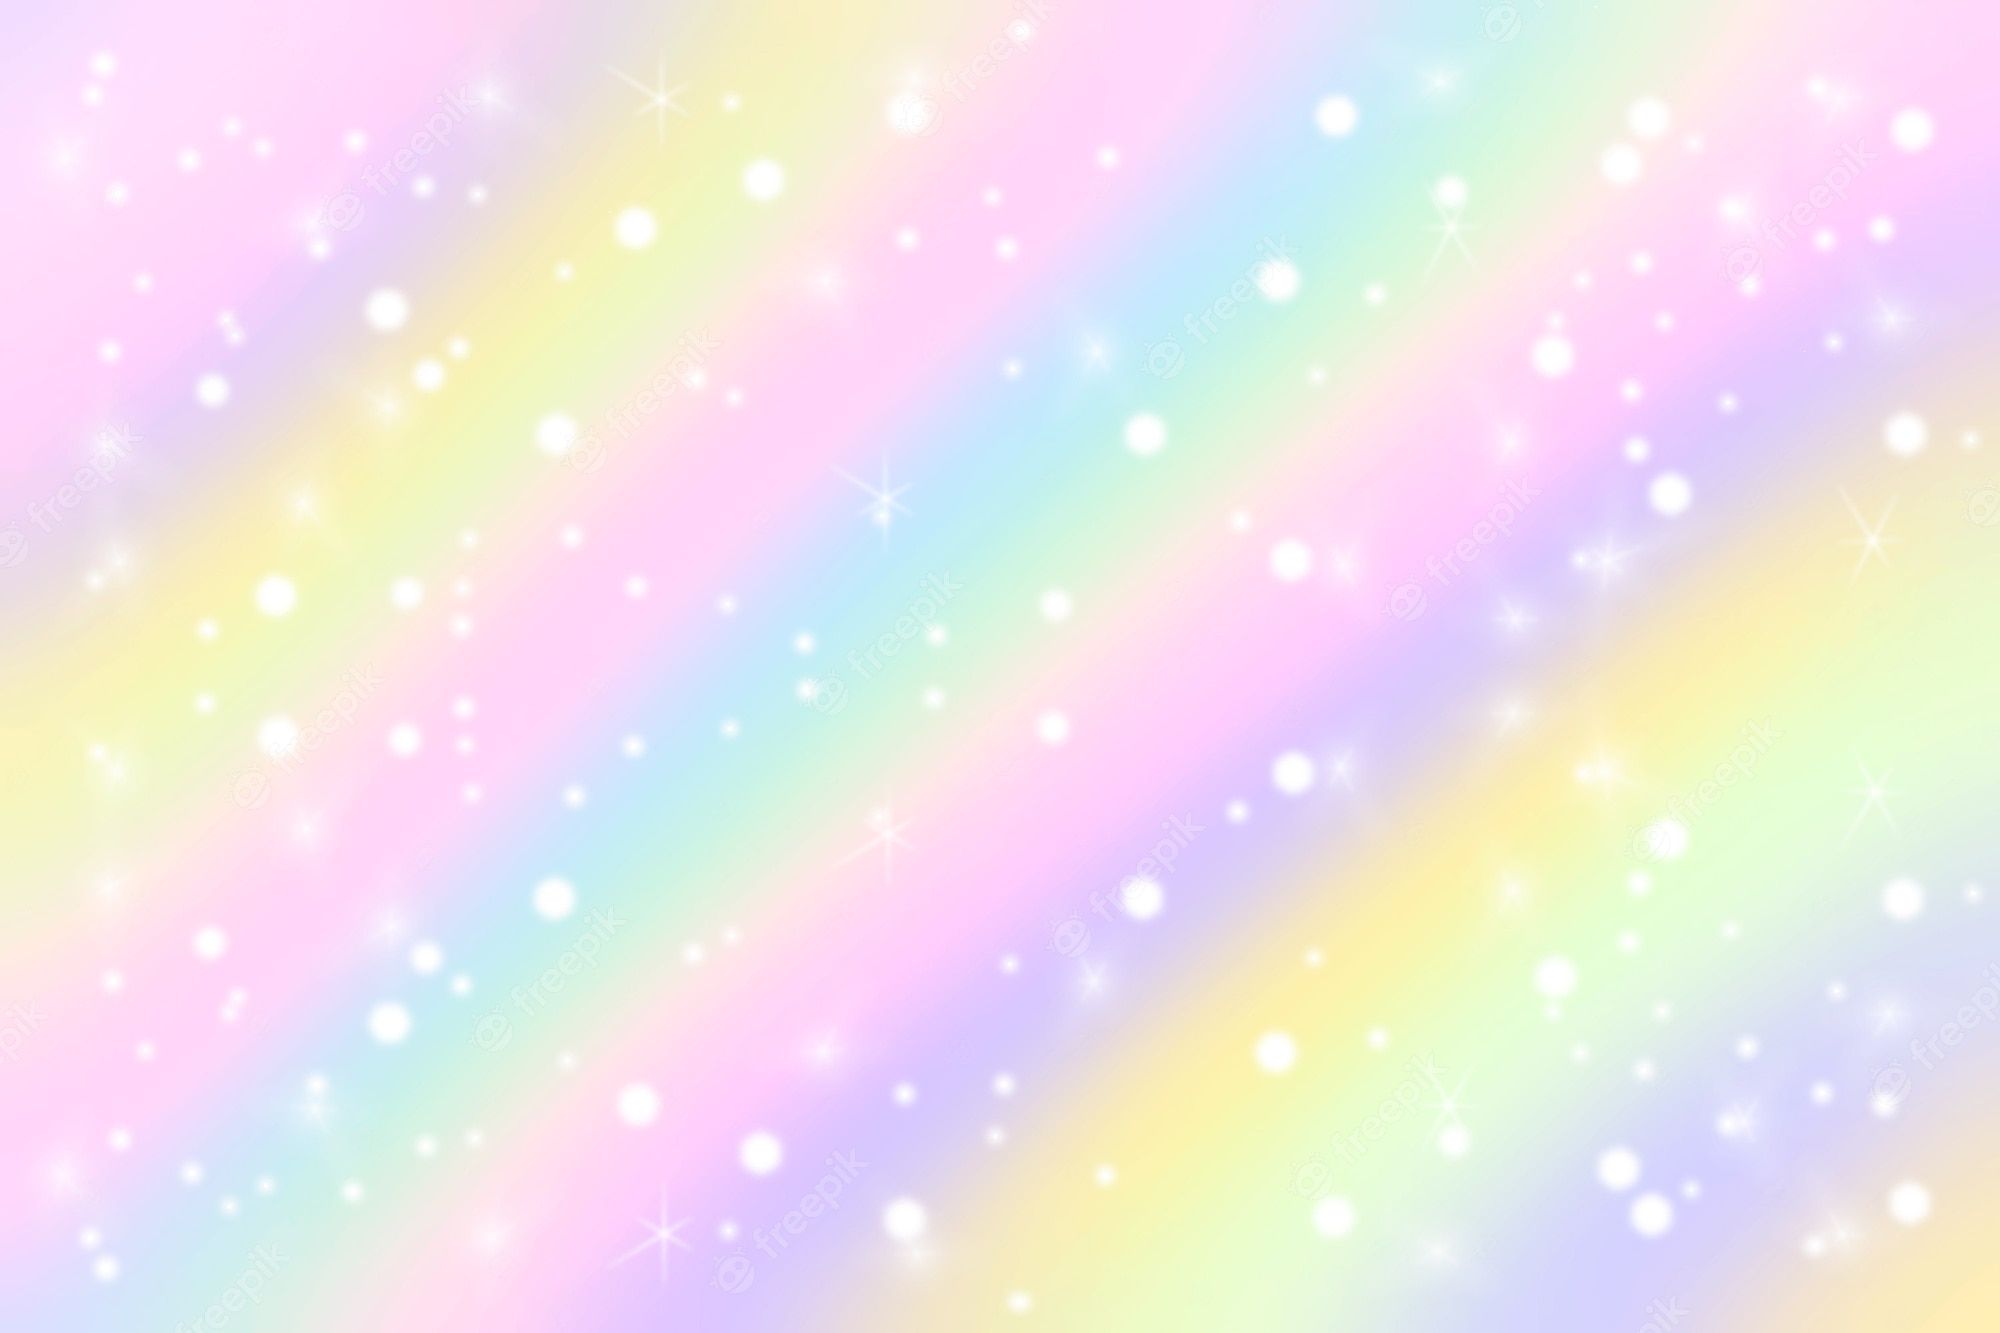 A rainbow colored background with white dots - Pastel rainbow